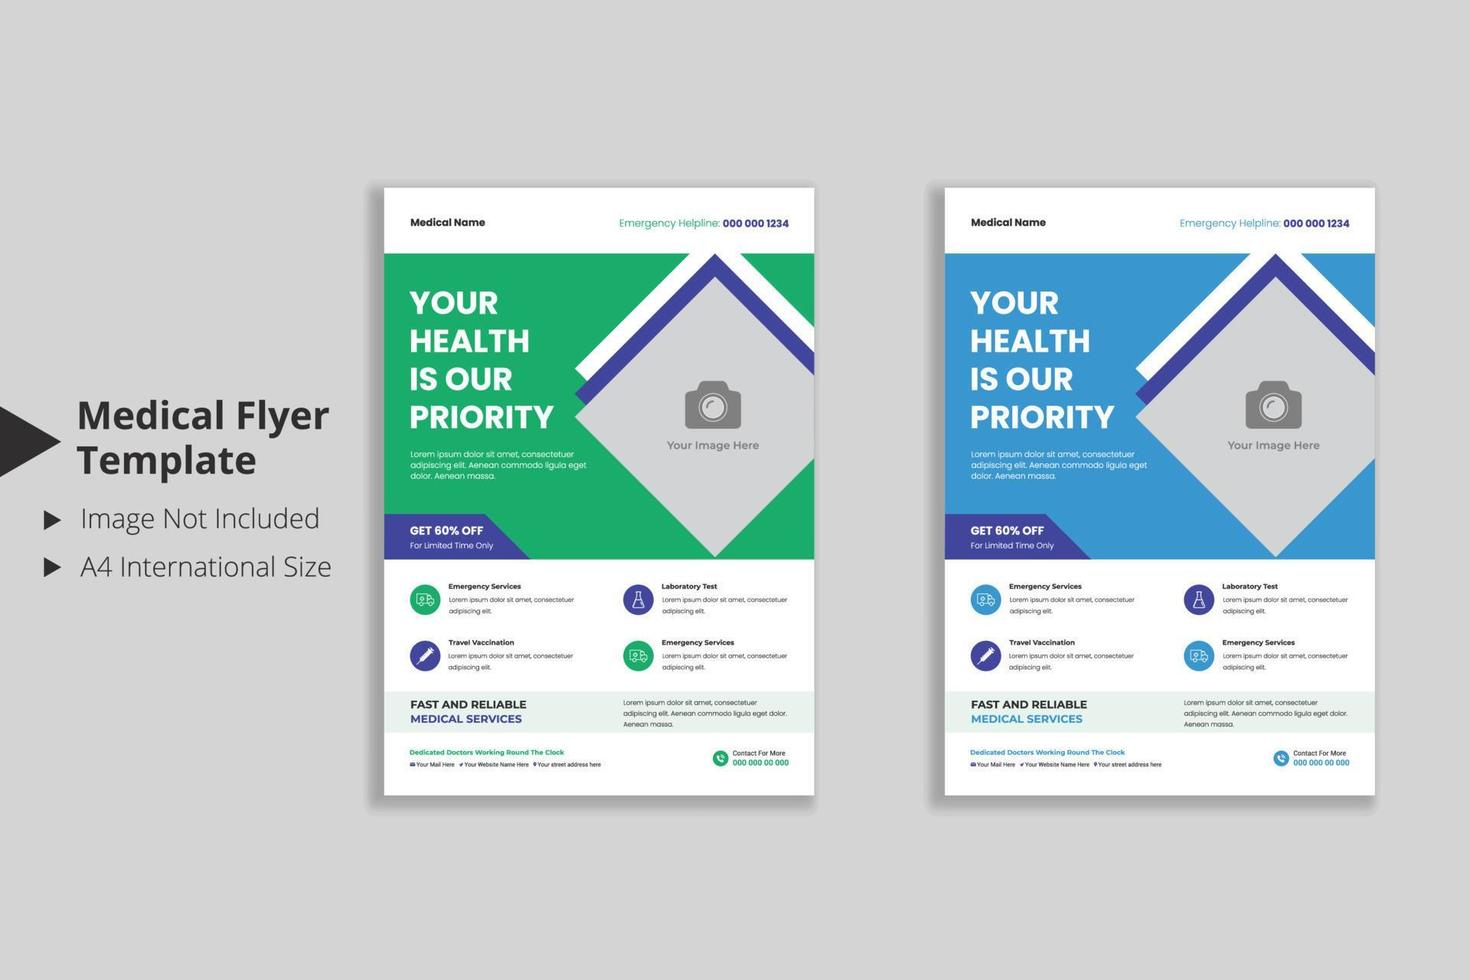 Medical Flyer Template Design for Health Care Services vector